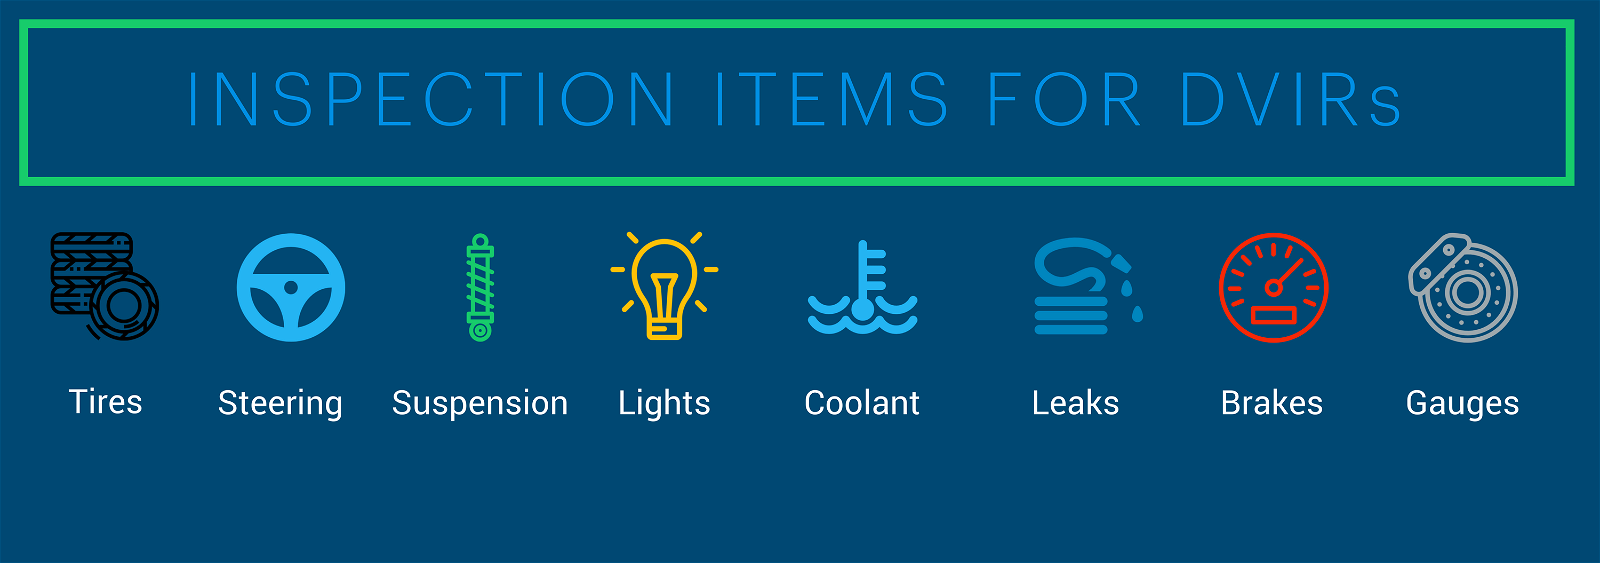 inspection-items-infographic